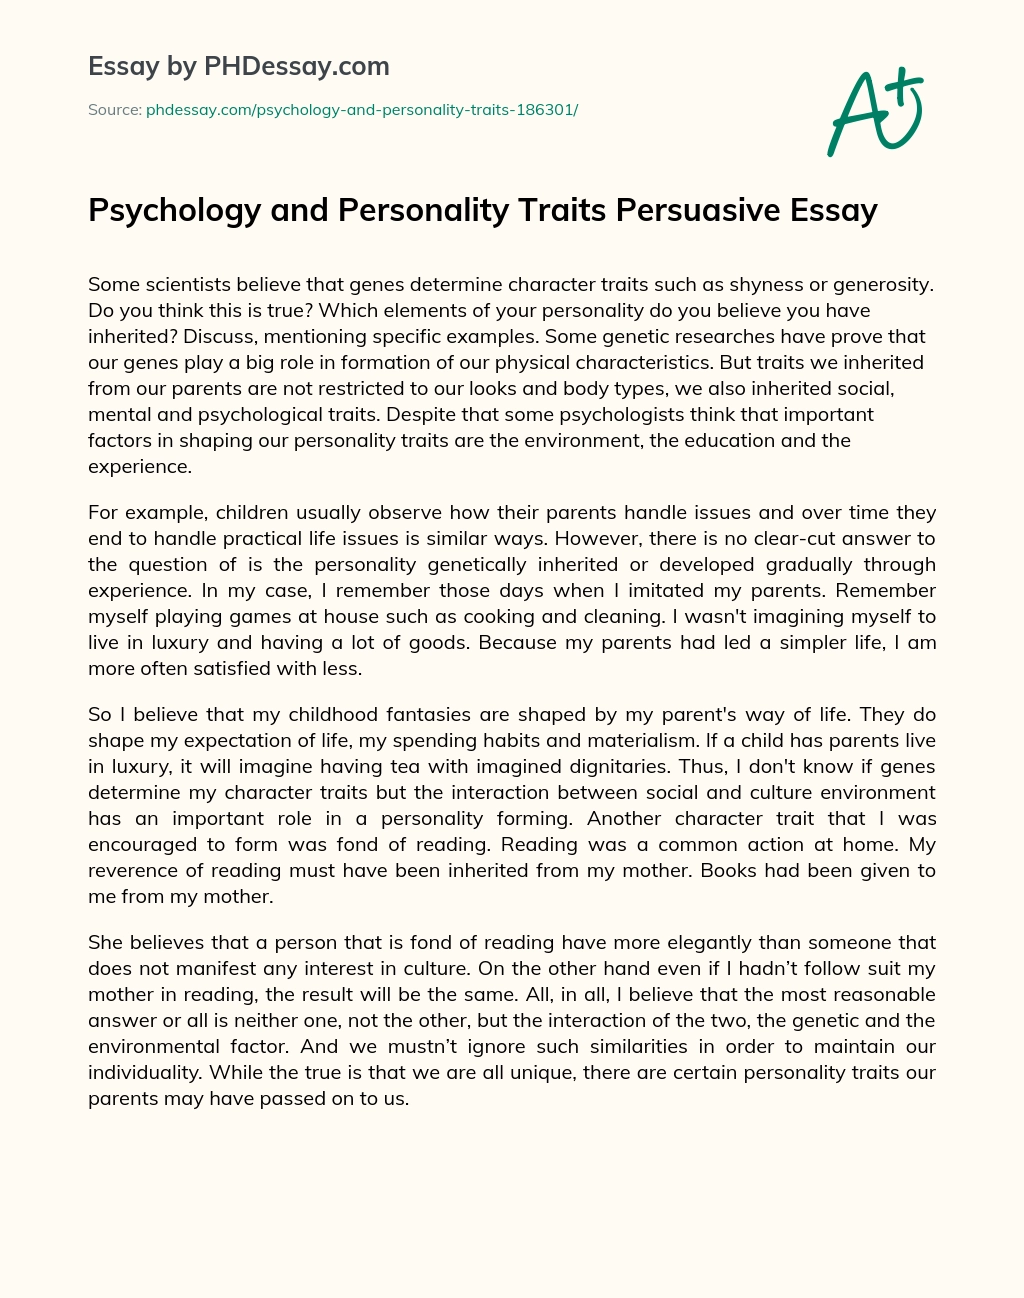 Psychology and Personality Traits Persuasive Essay essay